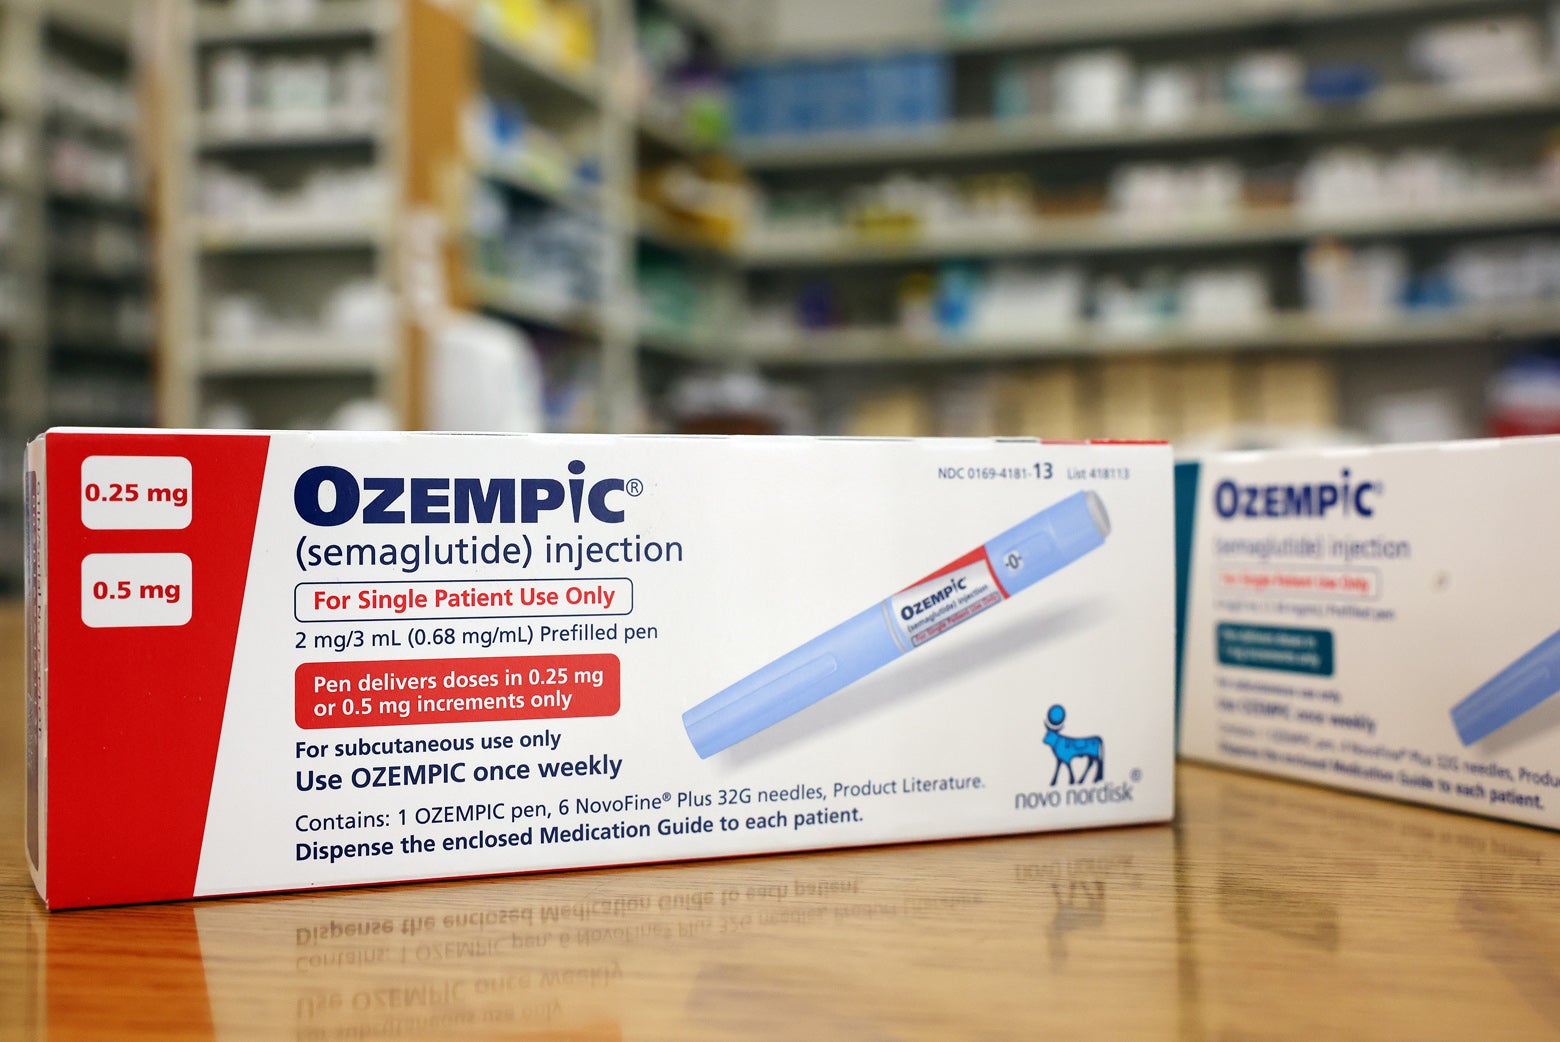 How to Make Ozempic More Affordable